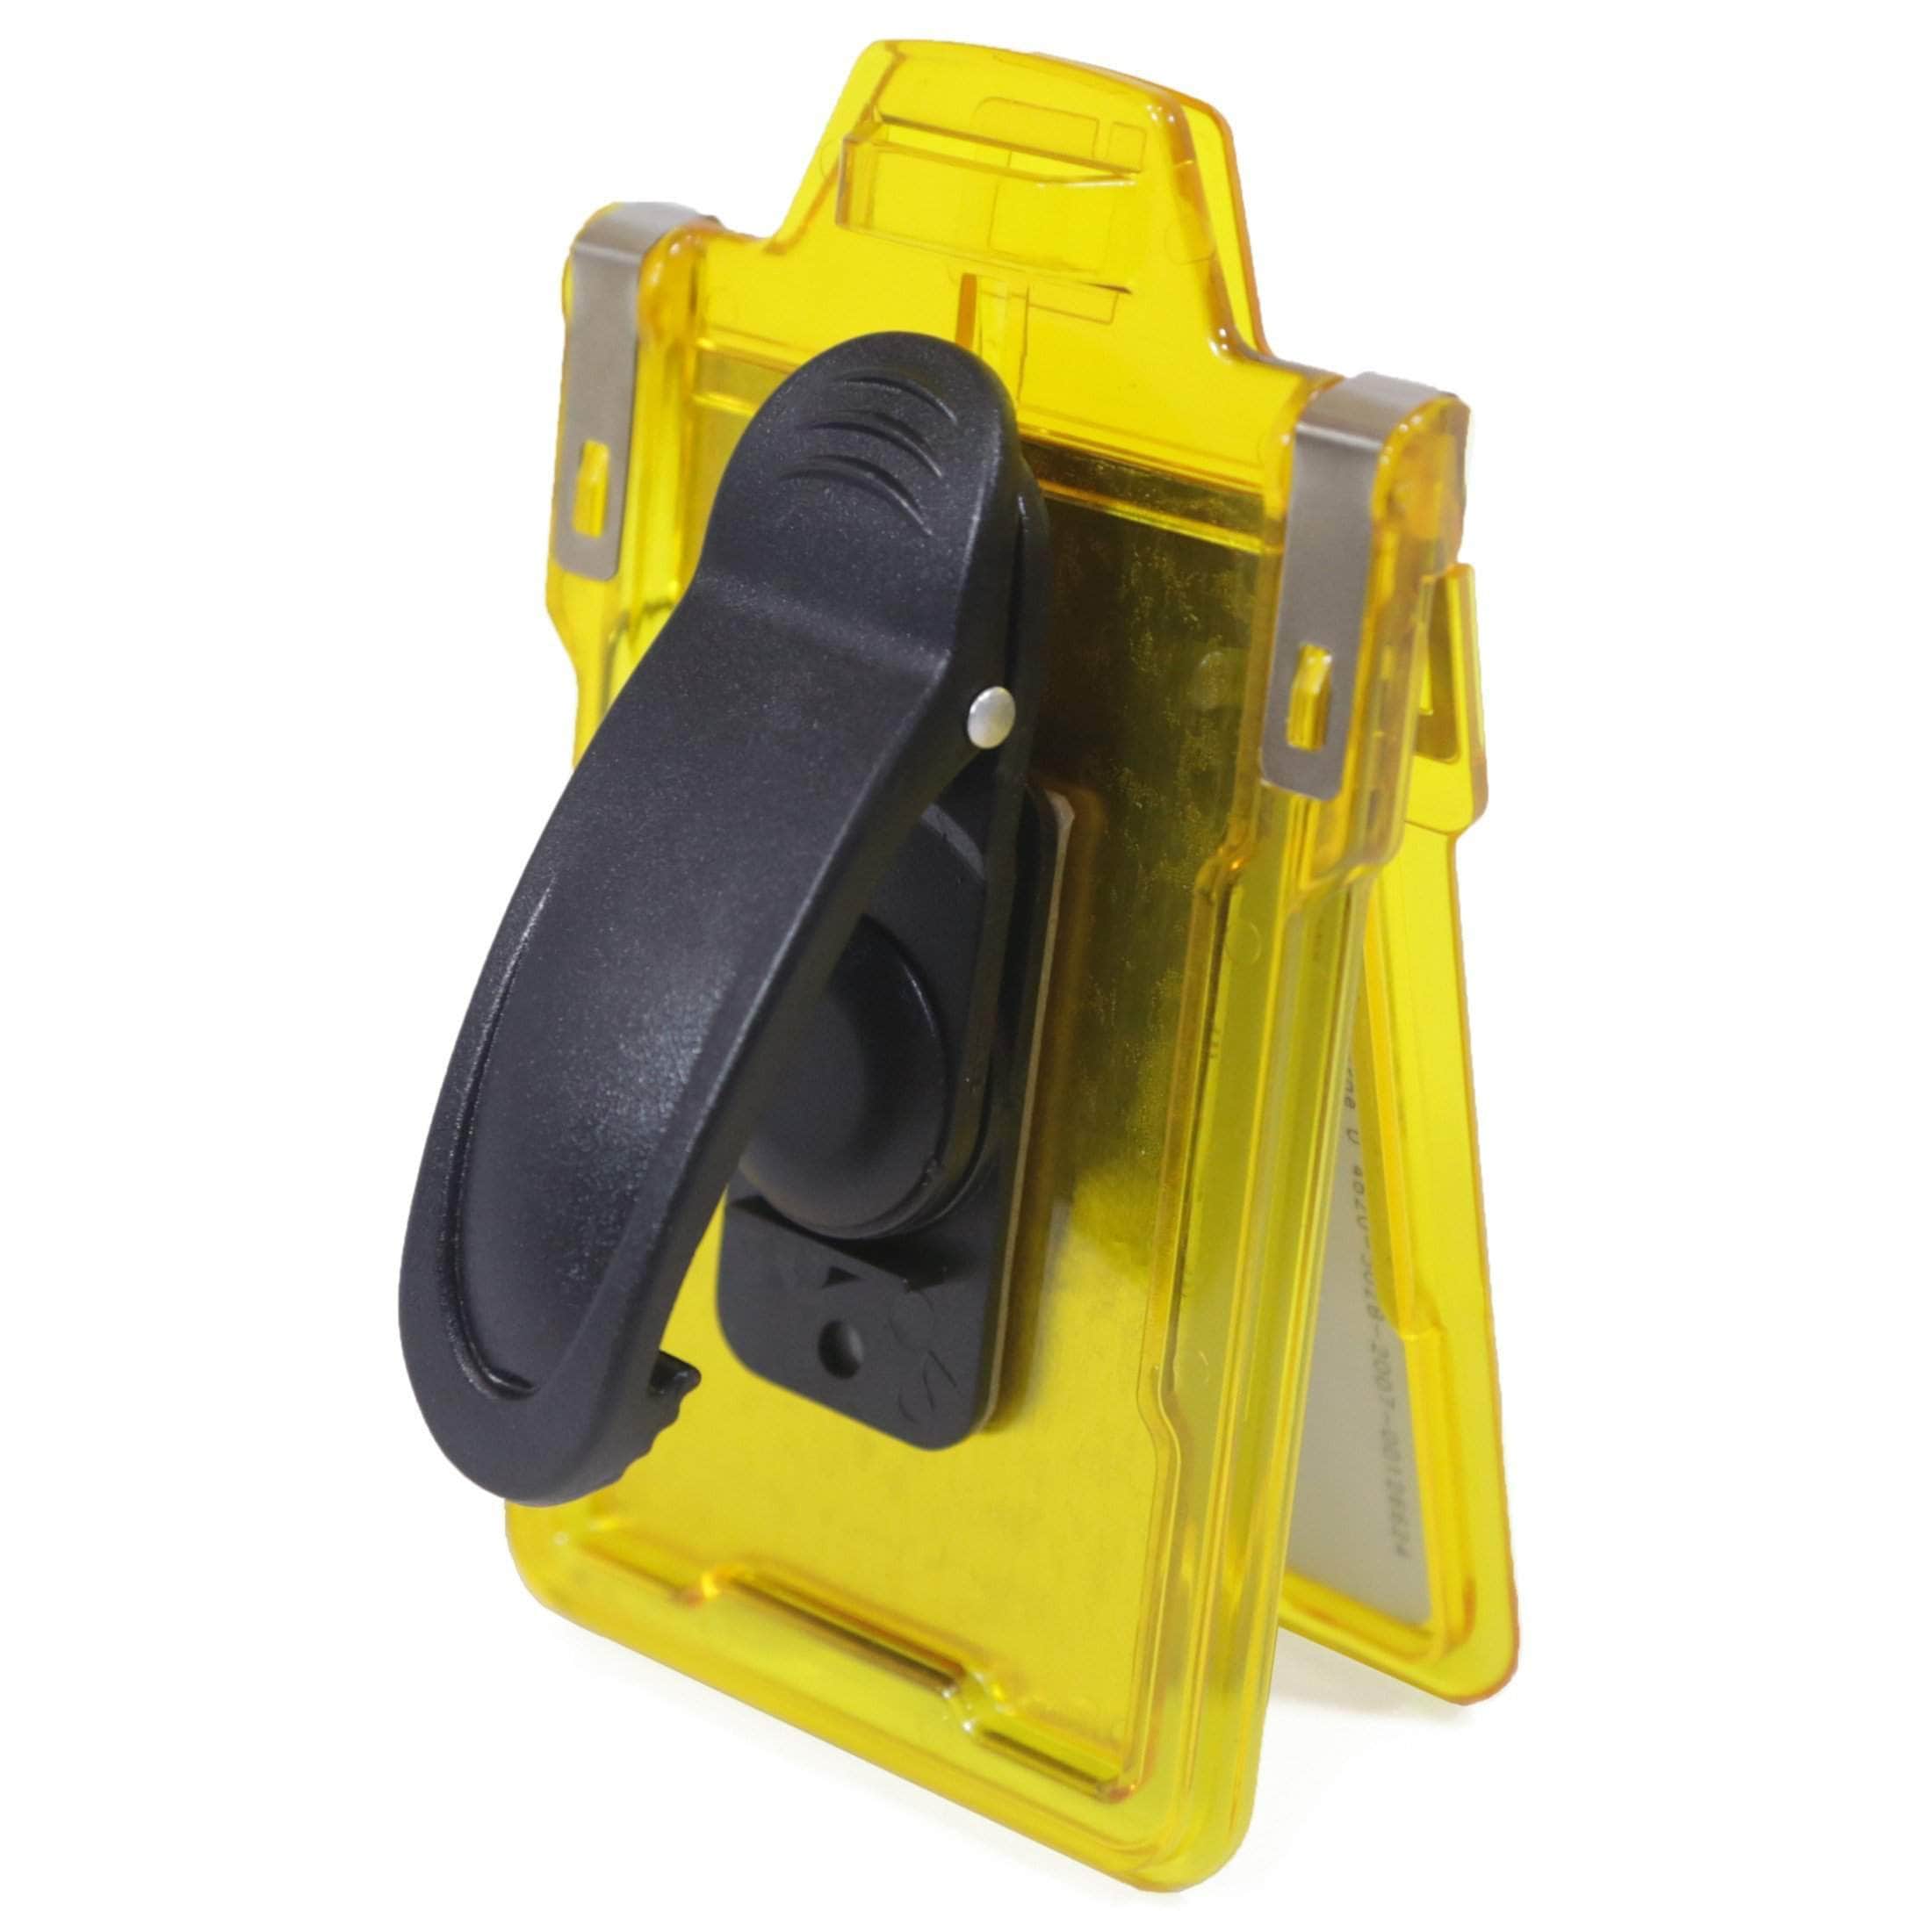 ID Stronghold Badgeholder Yellow Secure Badge Holder Classic Vertical 1 Card Holder With Belt Clip